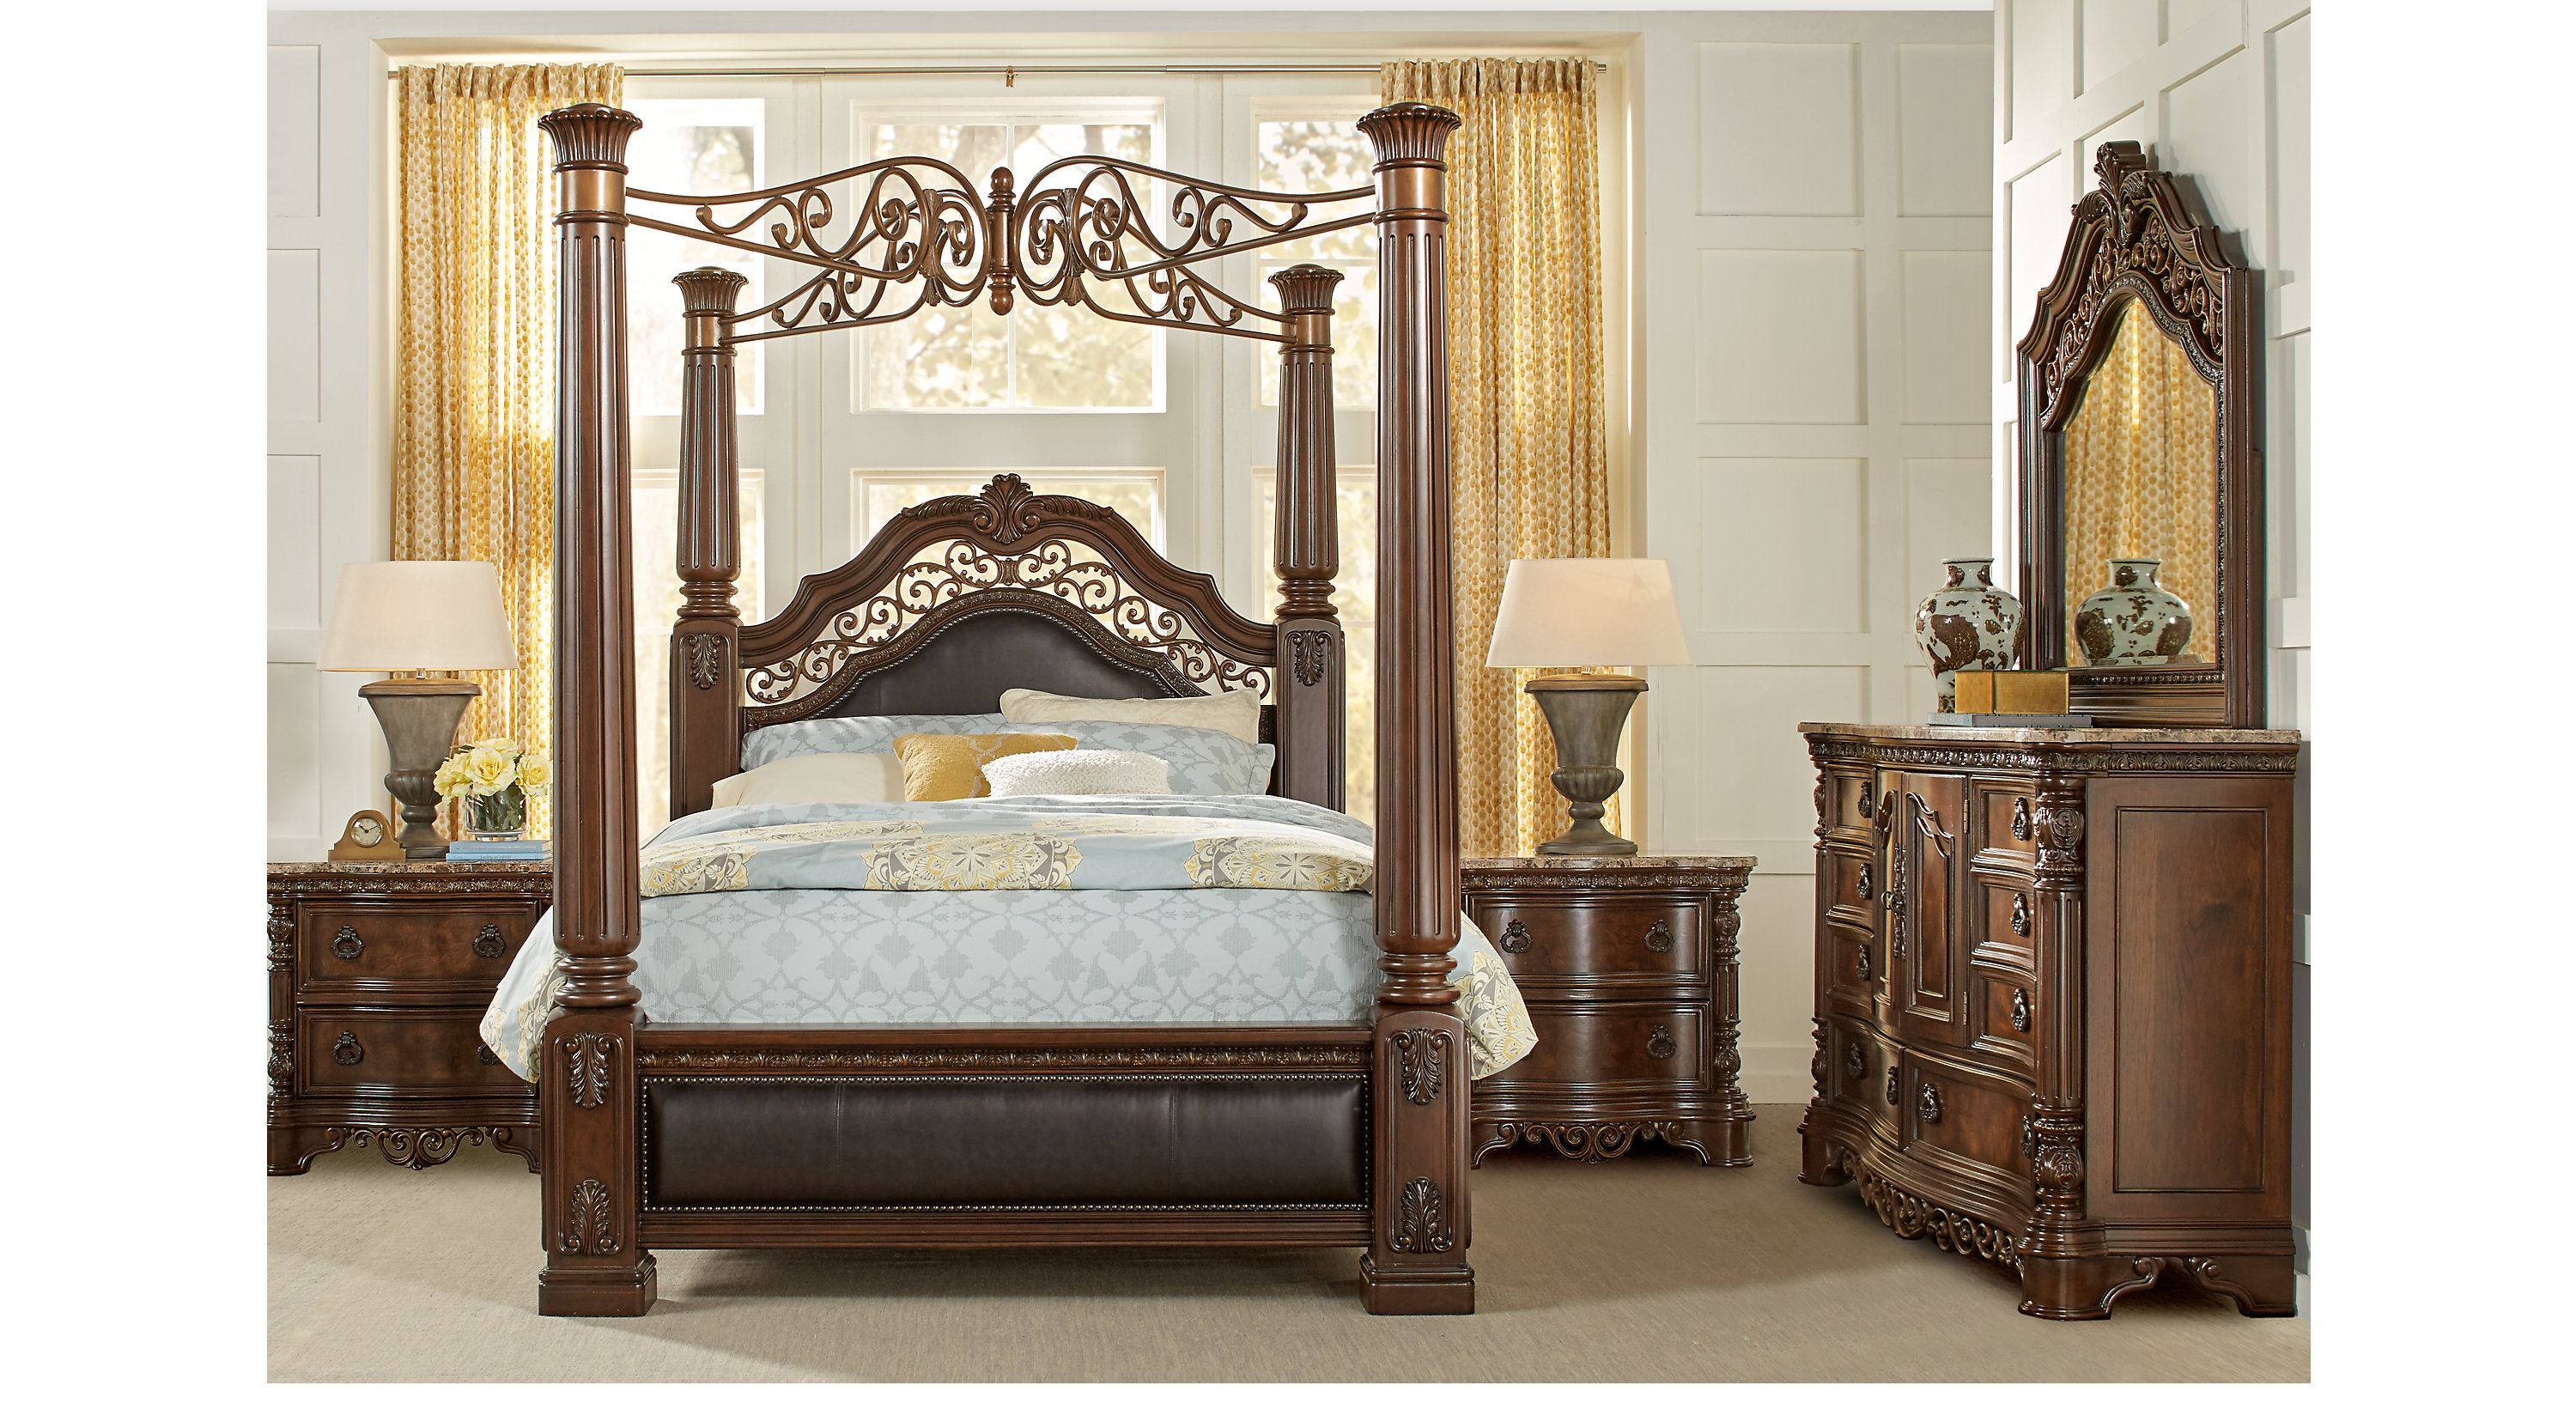 Queen Sized Canopy Bedroom Sets